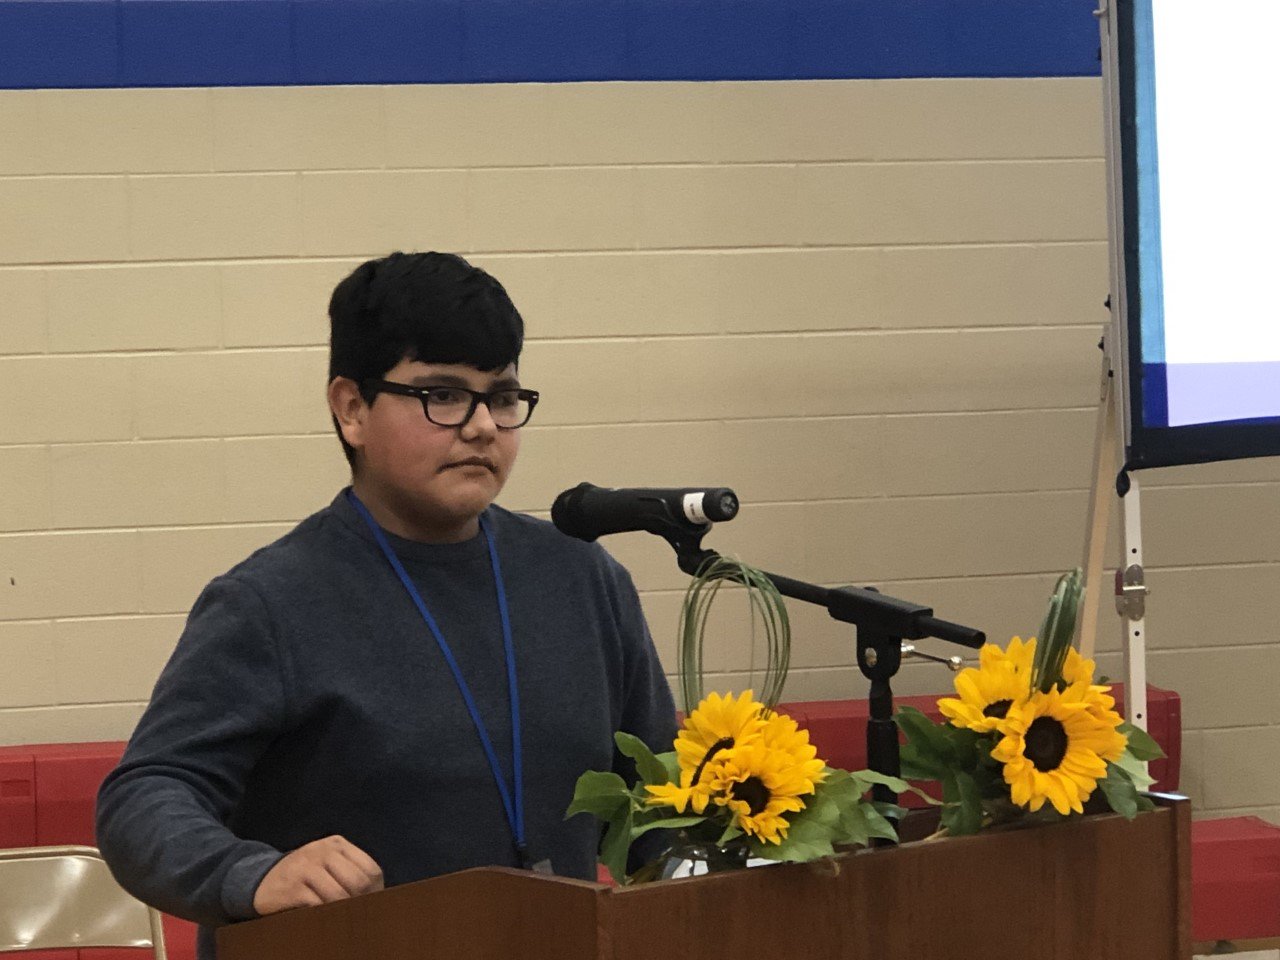 Jeremy Mancera, a Royal Junior High student, was among the speakers at a "Soaring to Success with Royal" luncheon held Oct. 19 at Royal High School. Mancera spoke of what his Royal experience meant to him.